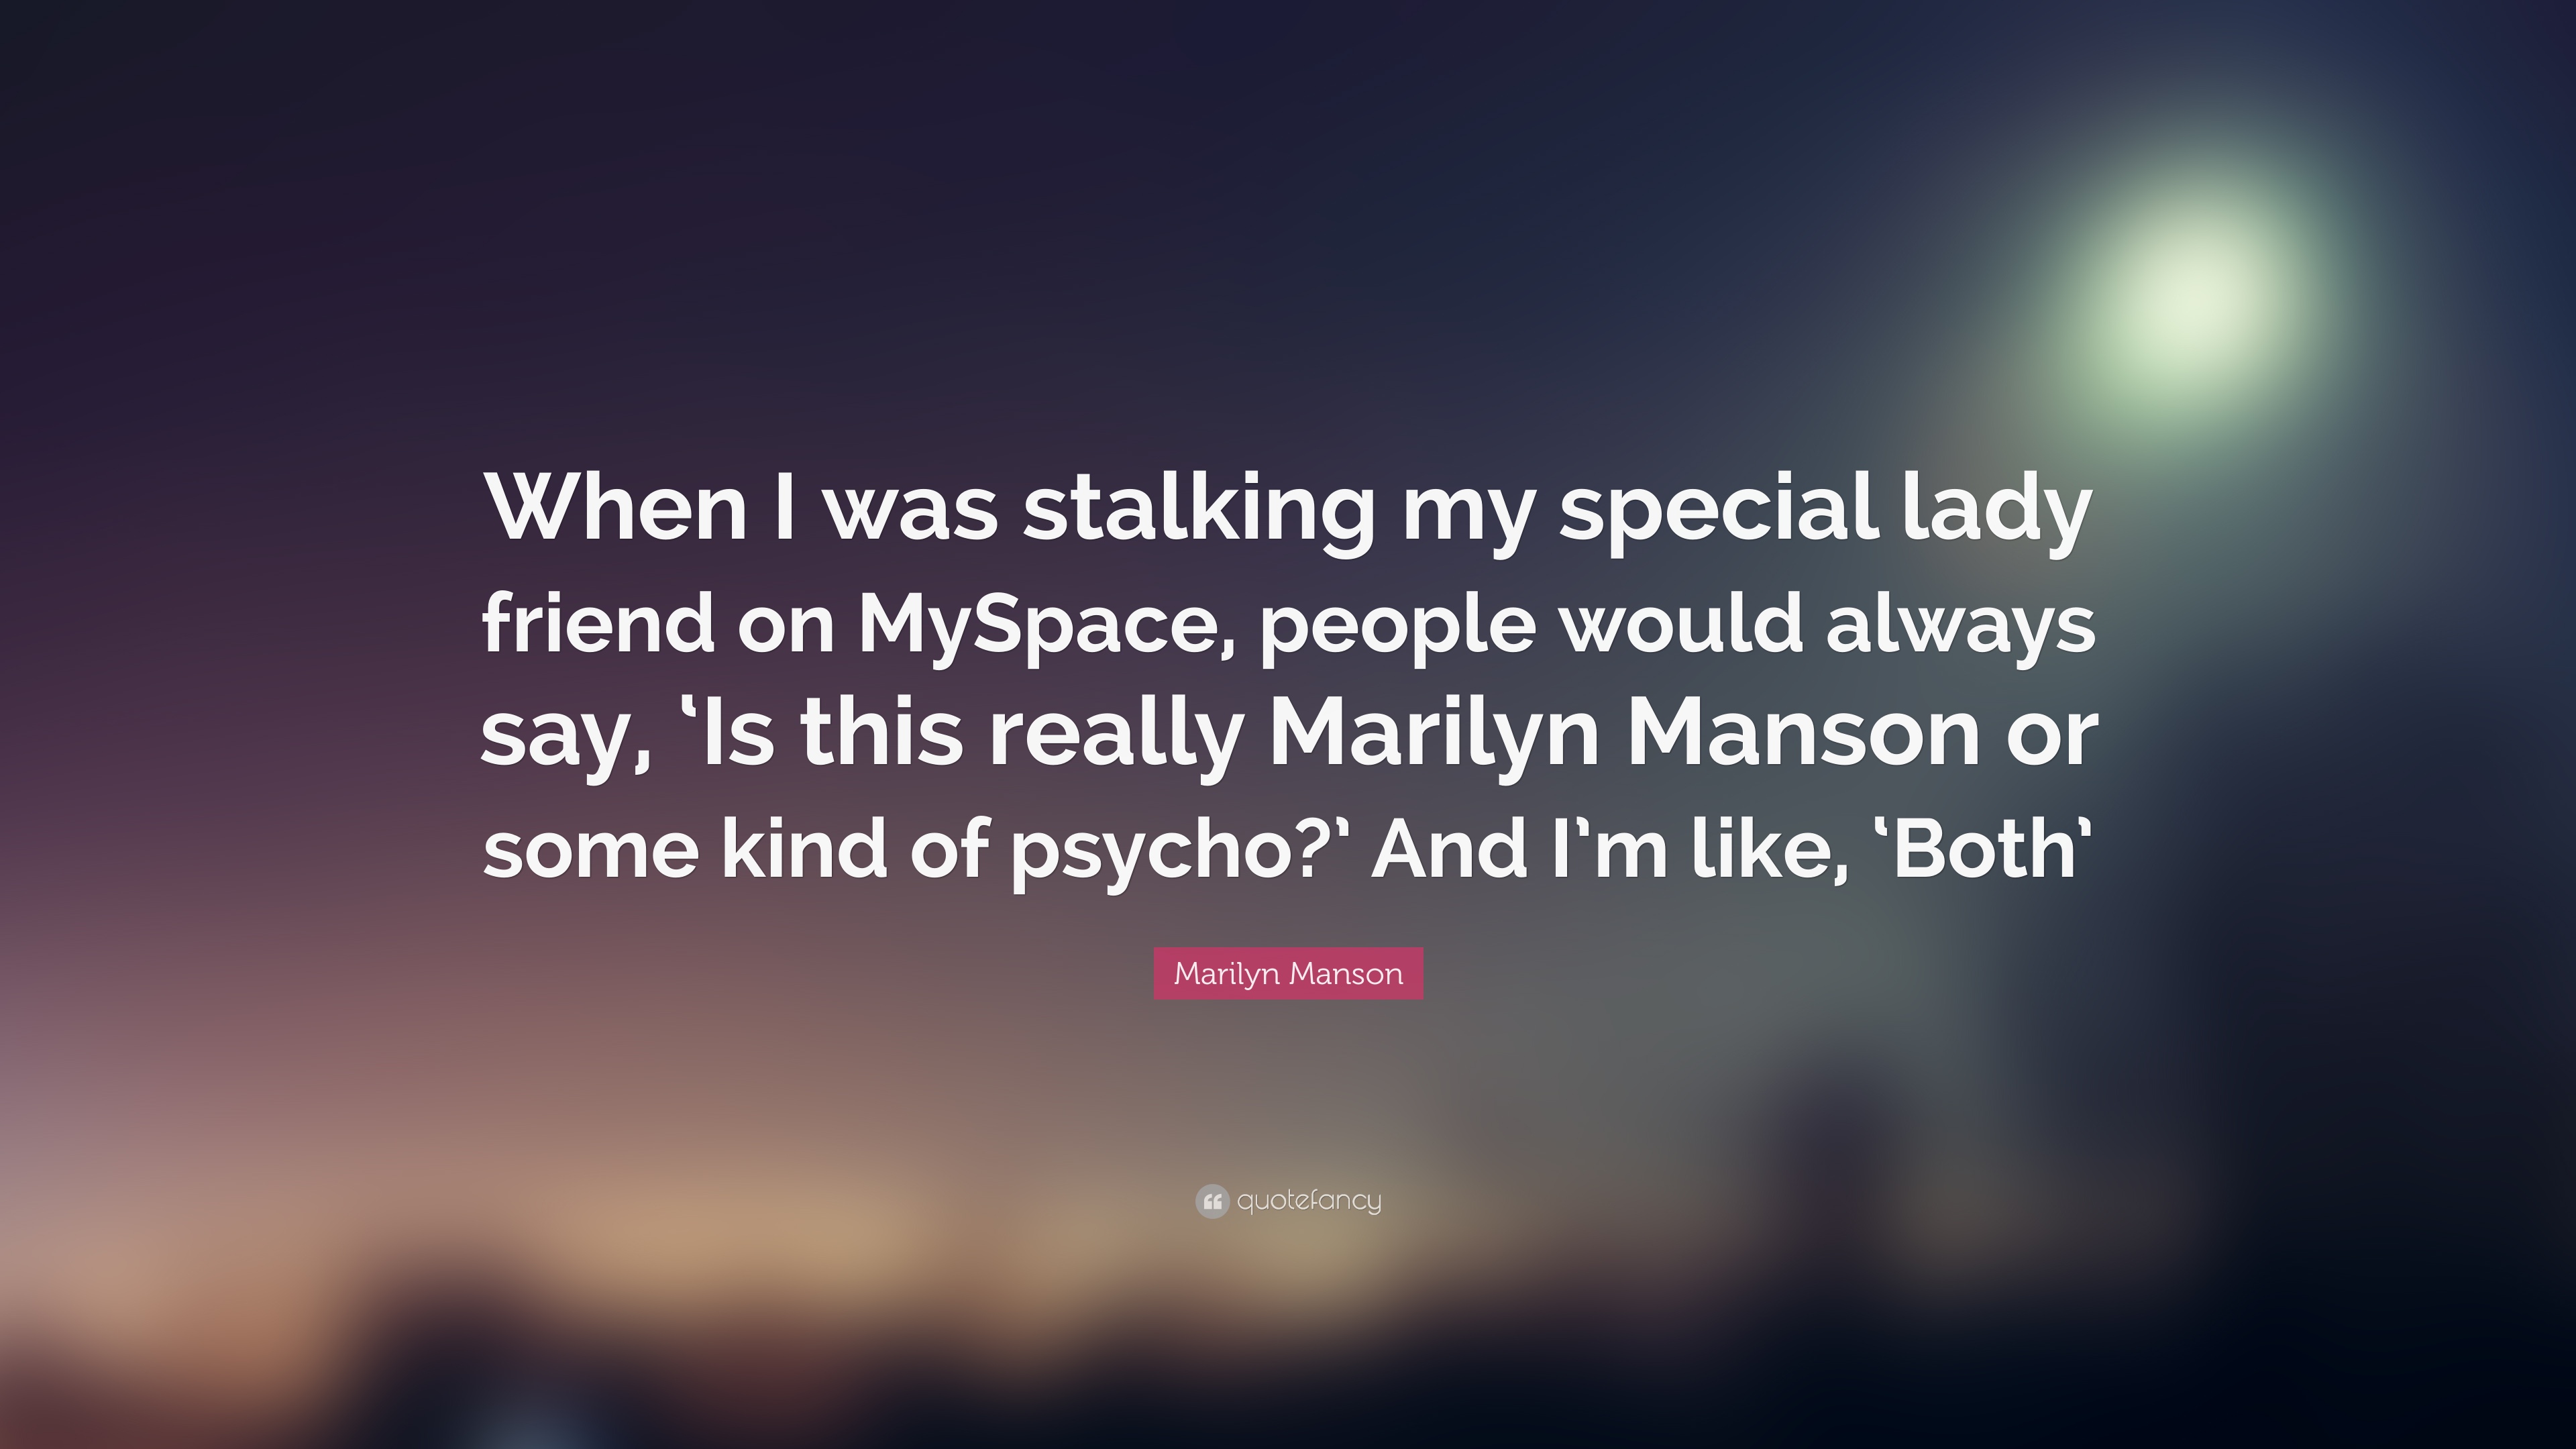 Marilyn Manson Quote: “When I was stalking my special lady friend on ...